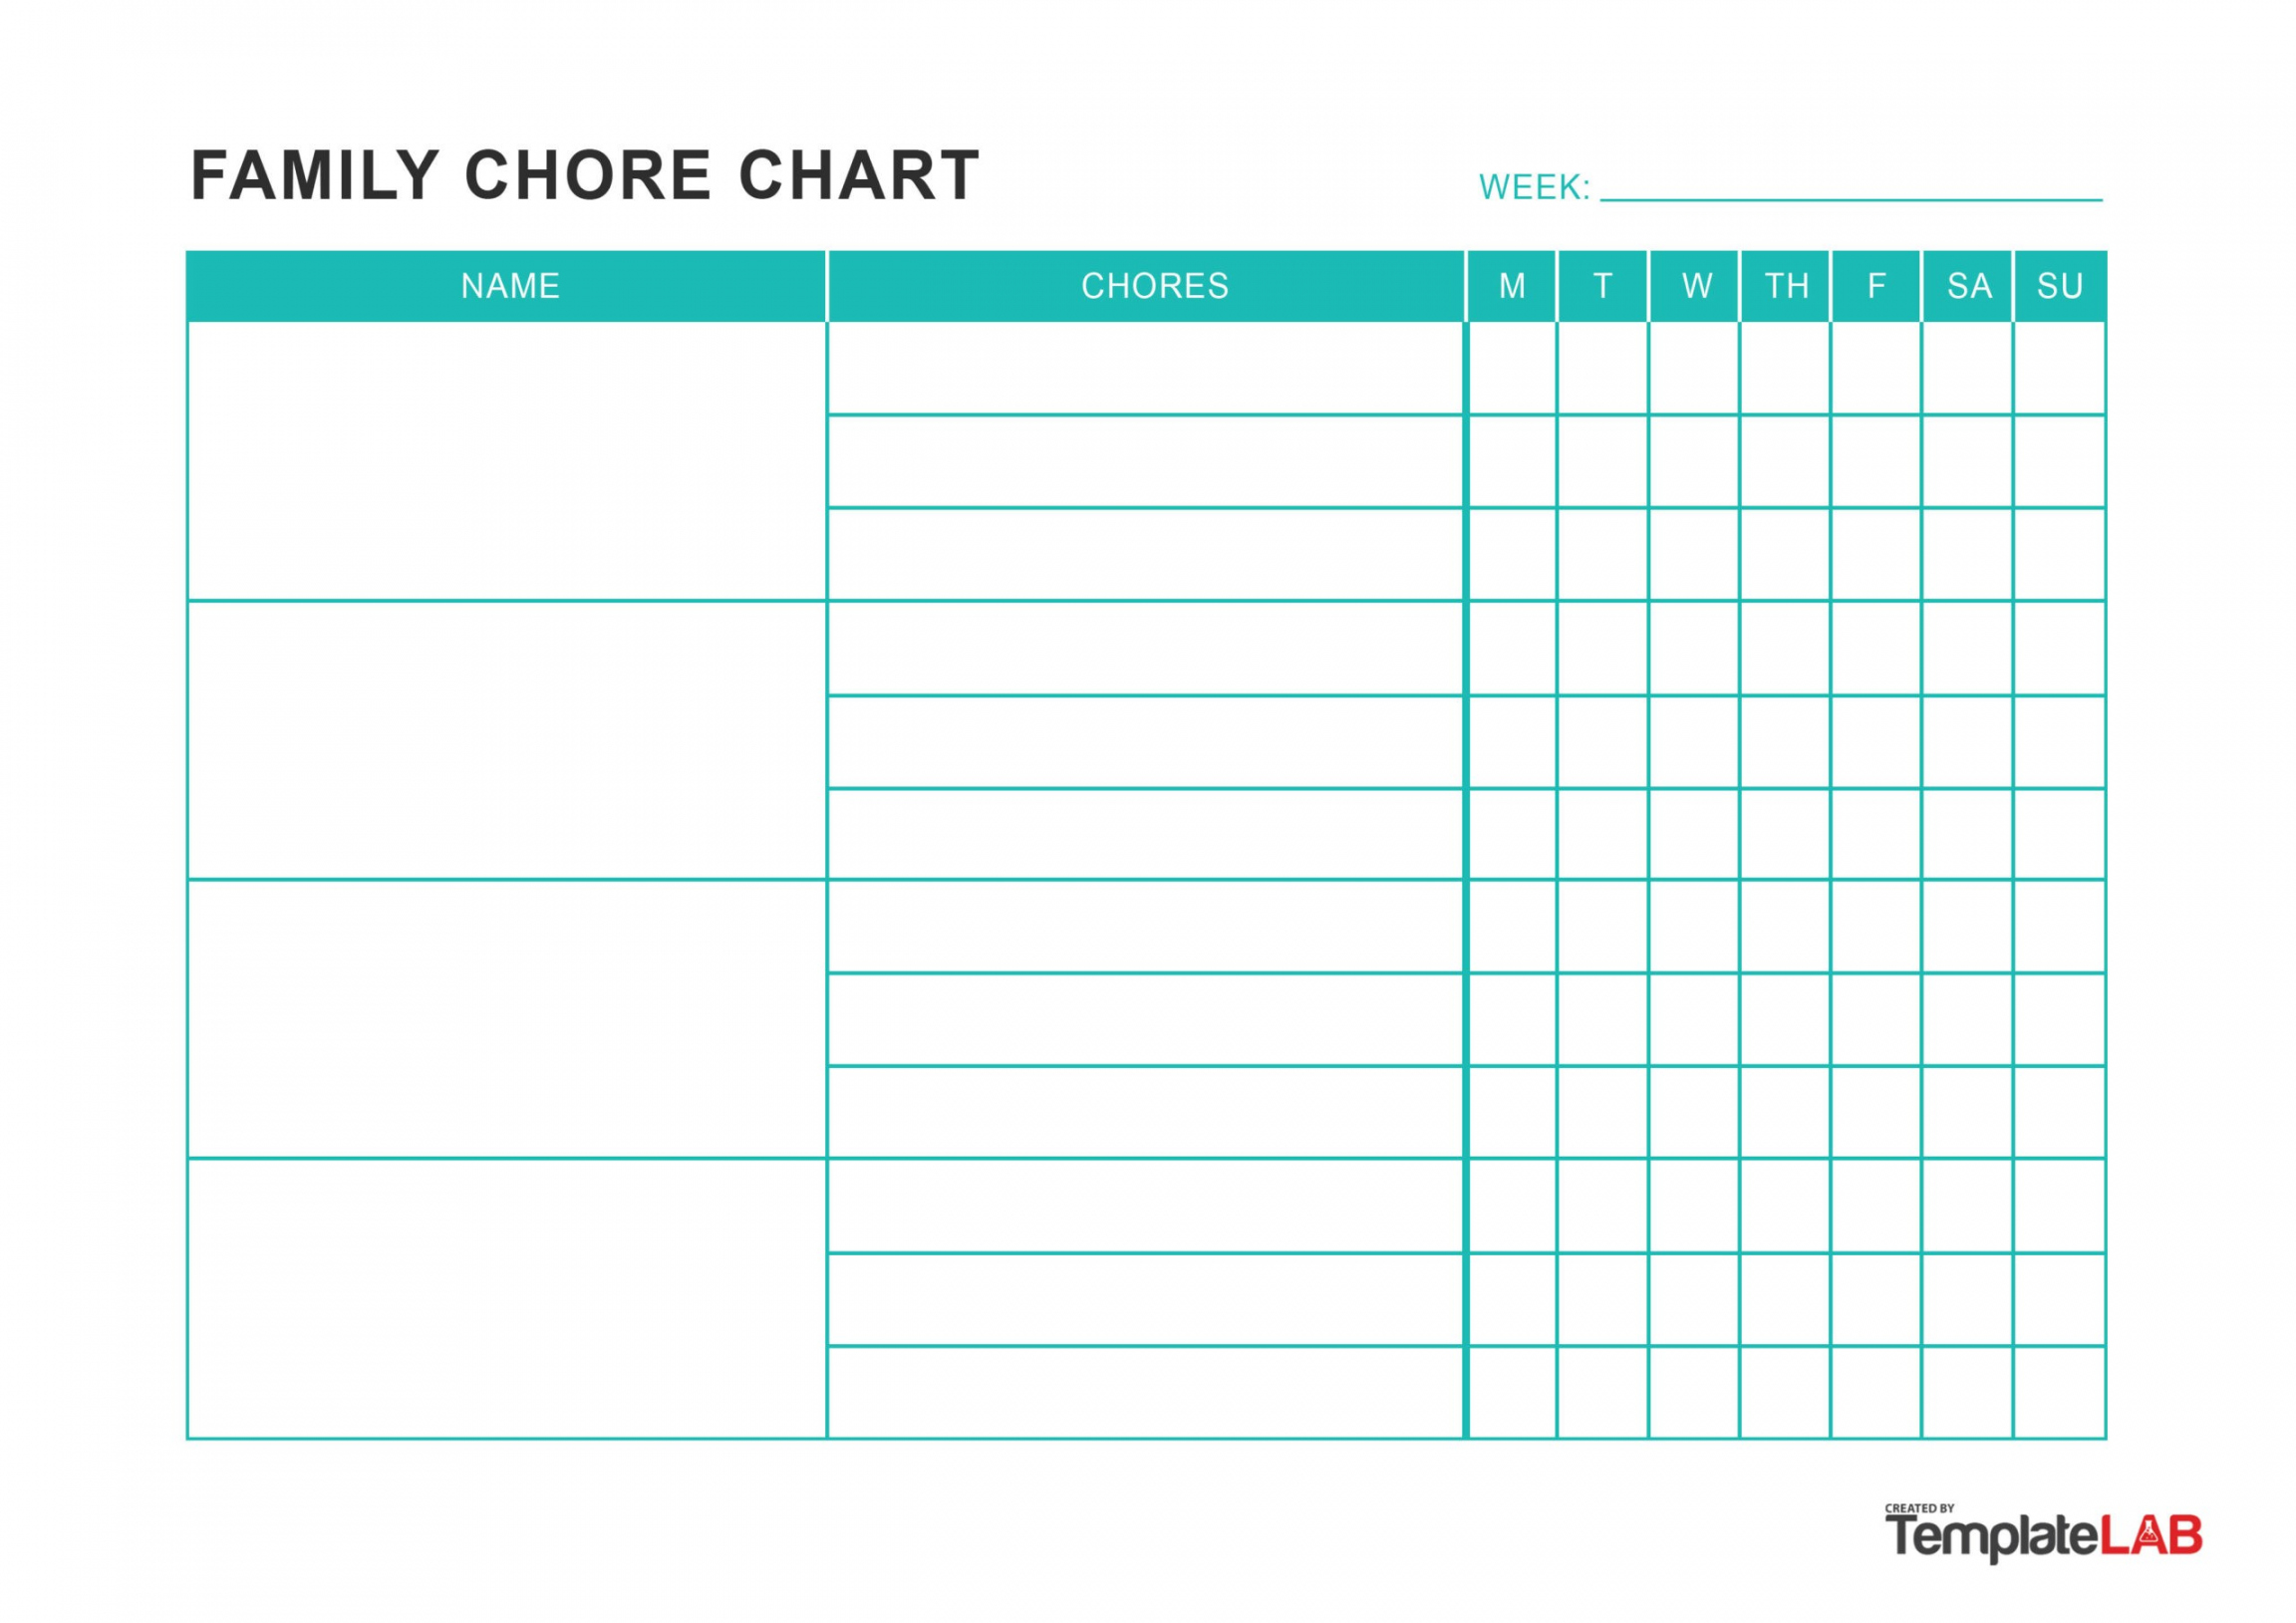 FREE Chore Chart Templates for Kids ᐅ TemplateLab - FREE Printables - Family Chore Chart Free Printable